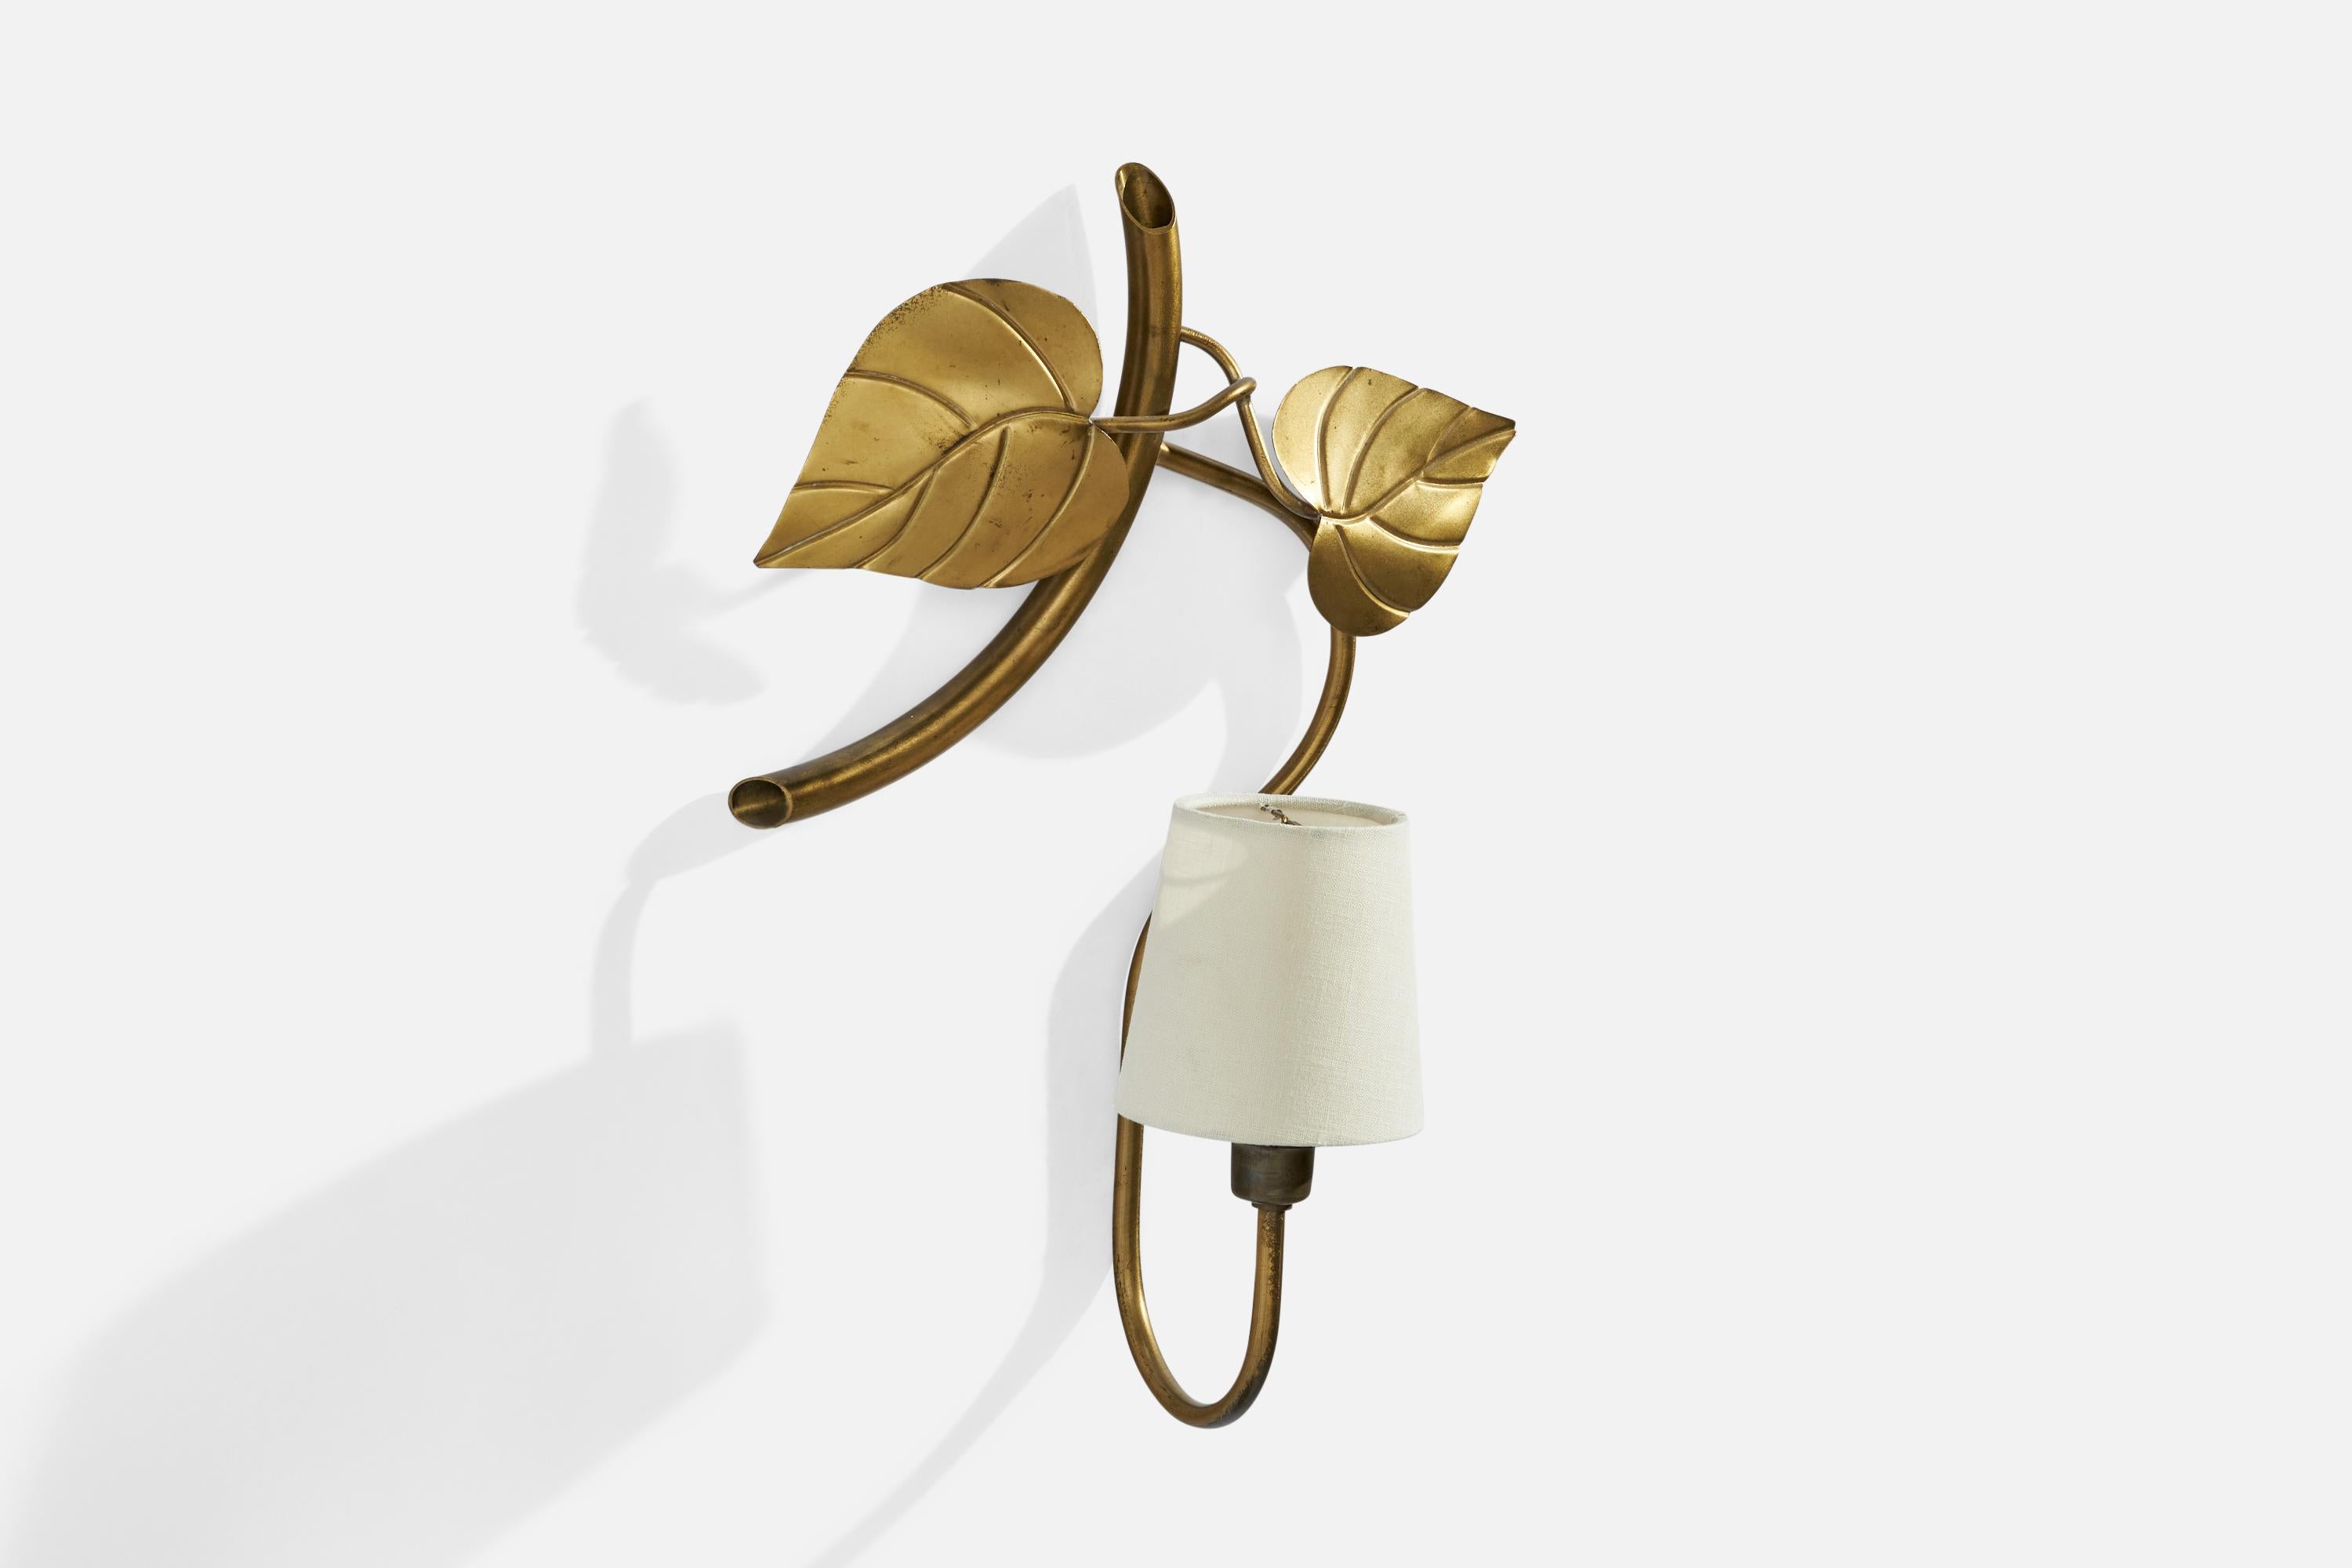 A brass and off-white fabric wall light designed and produced in Sweden, 1940s.

Overall Dimensions (inches): 17” H x 11.5”  W x 6” D
Back Plate Dimensions (inches): N/A
Bulb Specifications: E-12 Bulb
Number of Sockets: 1
All lighting will be